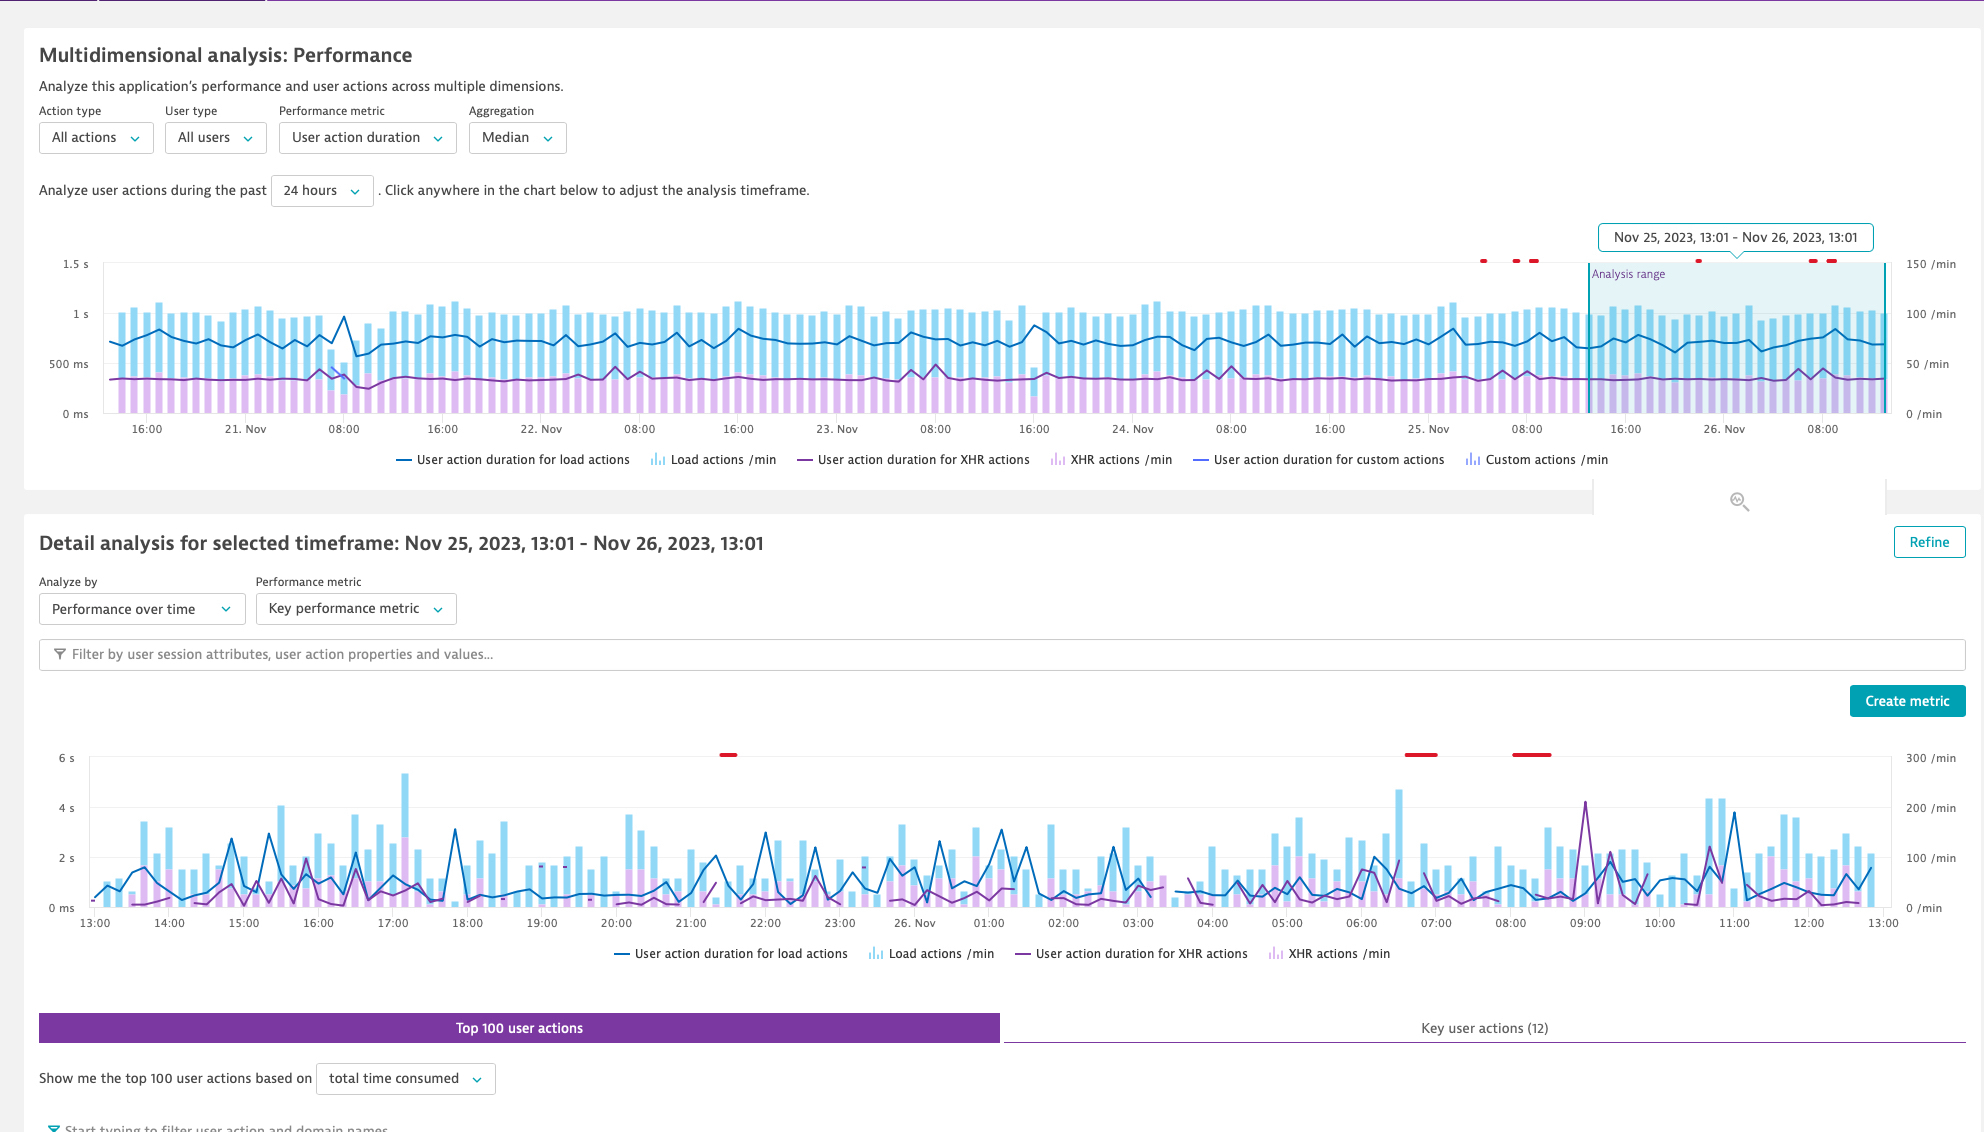 Dive into performance metrics and examine user actions in detail based on types of actions, across different metrics and in specific timeframes to identify opportunities to improve end-user experience.